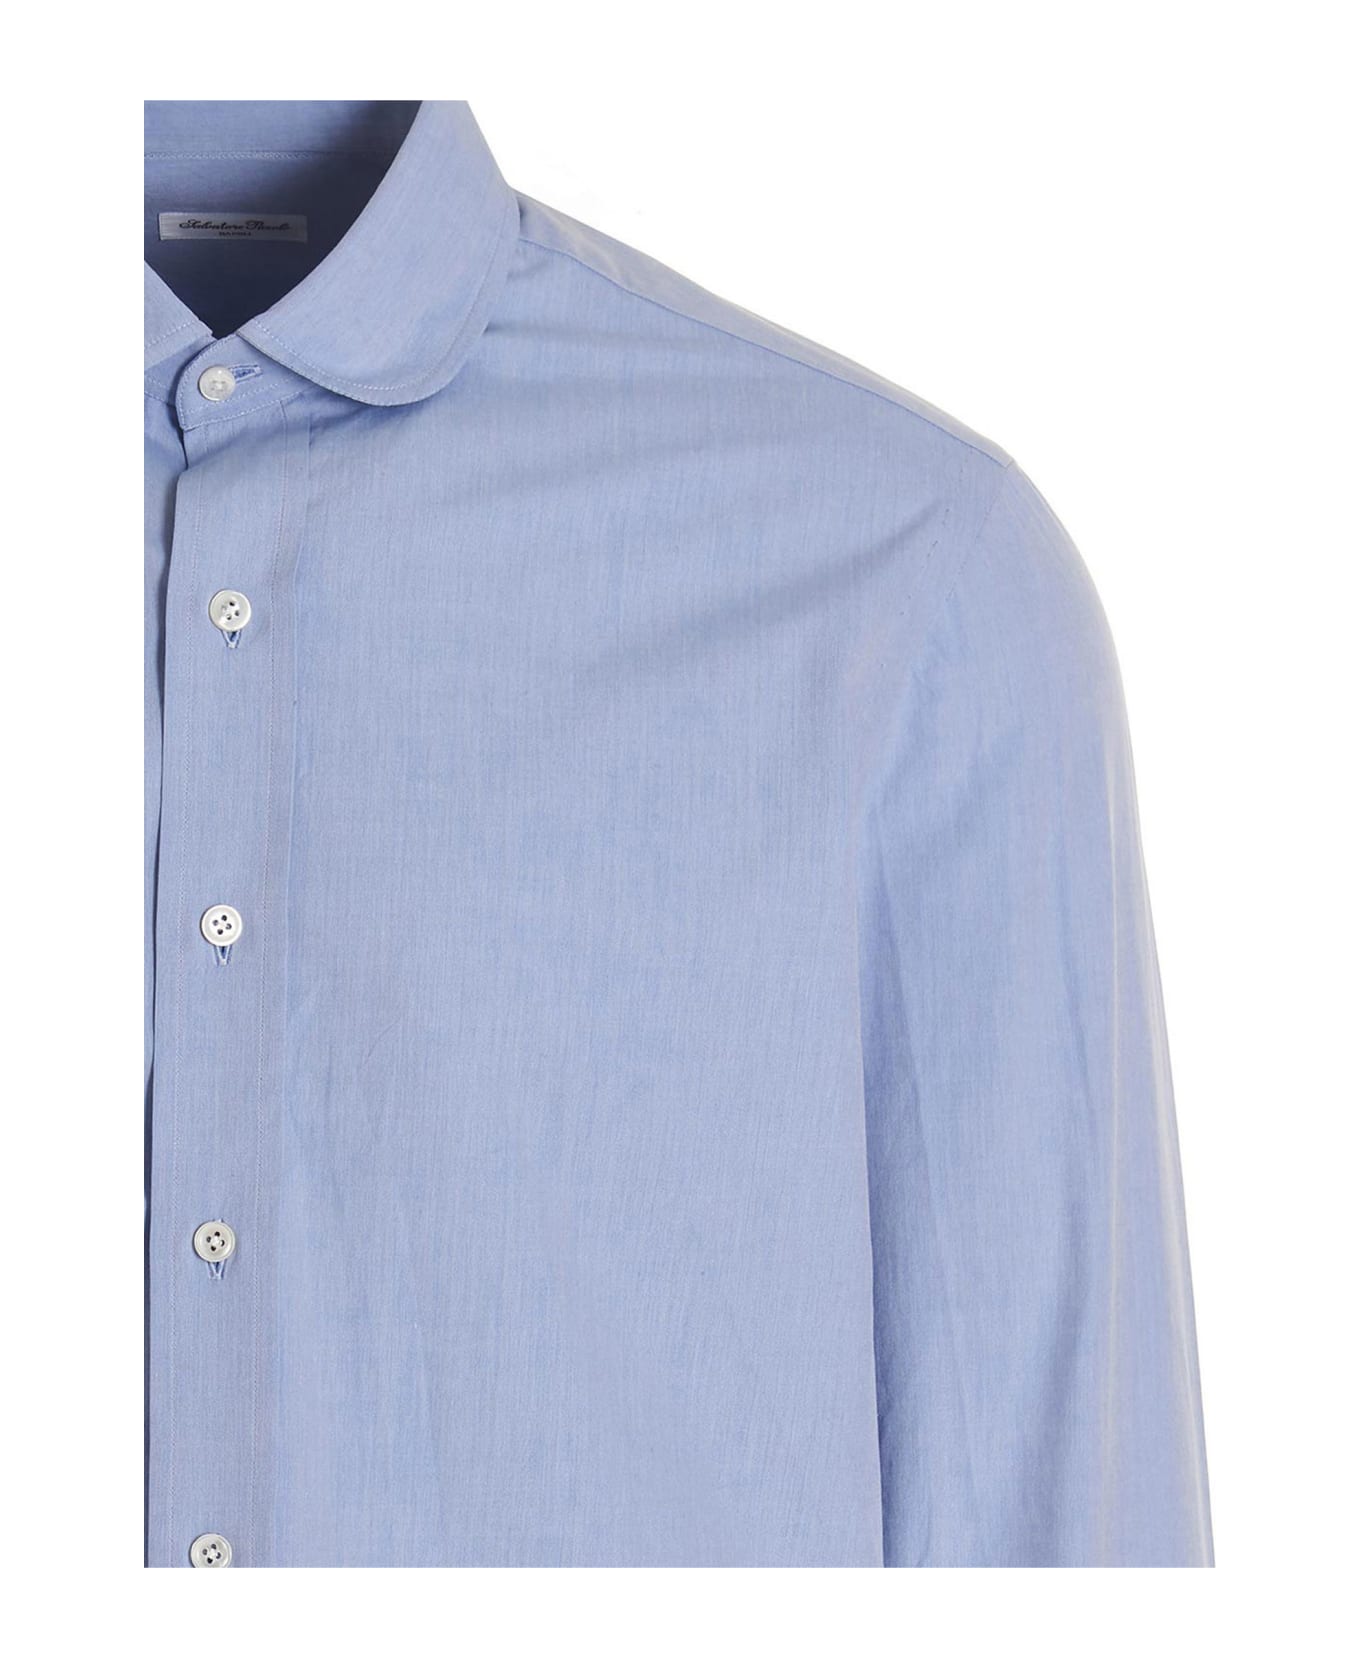 Salvatore Piccolo Rounded Collar Shirt - Light Blue シャツ